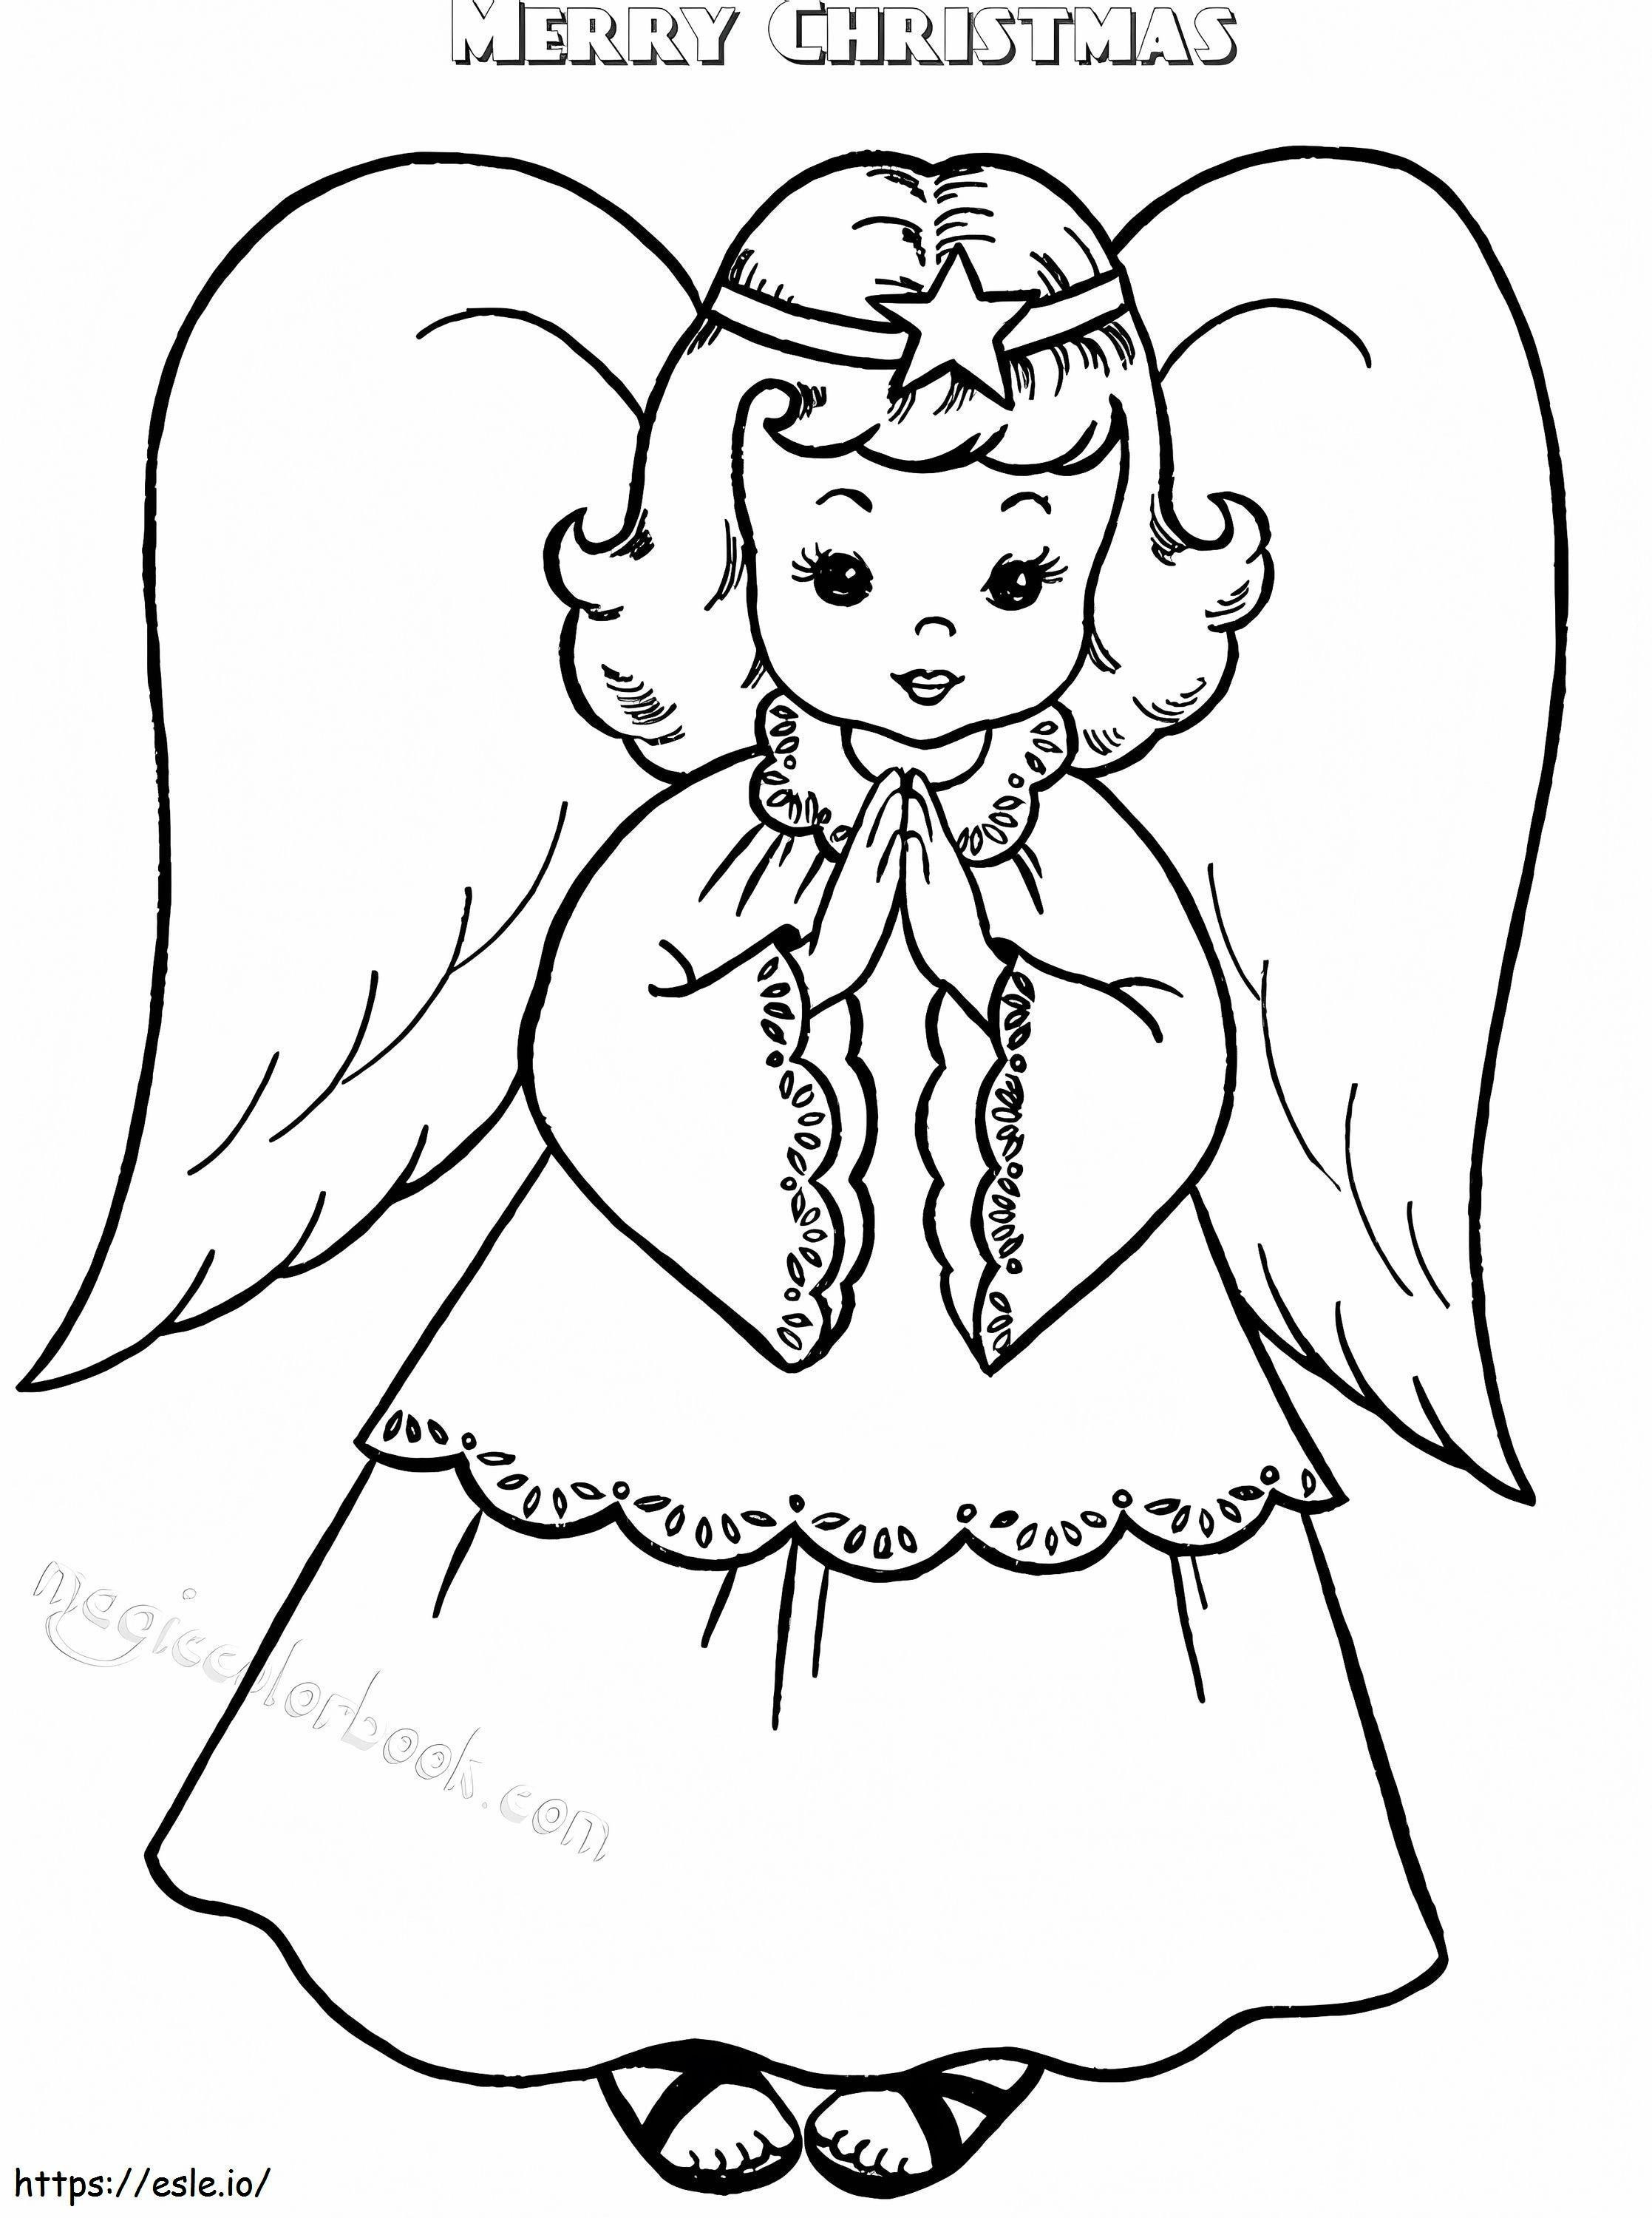 1544403103 Merry Christmas Full Size Printable coloring page